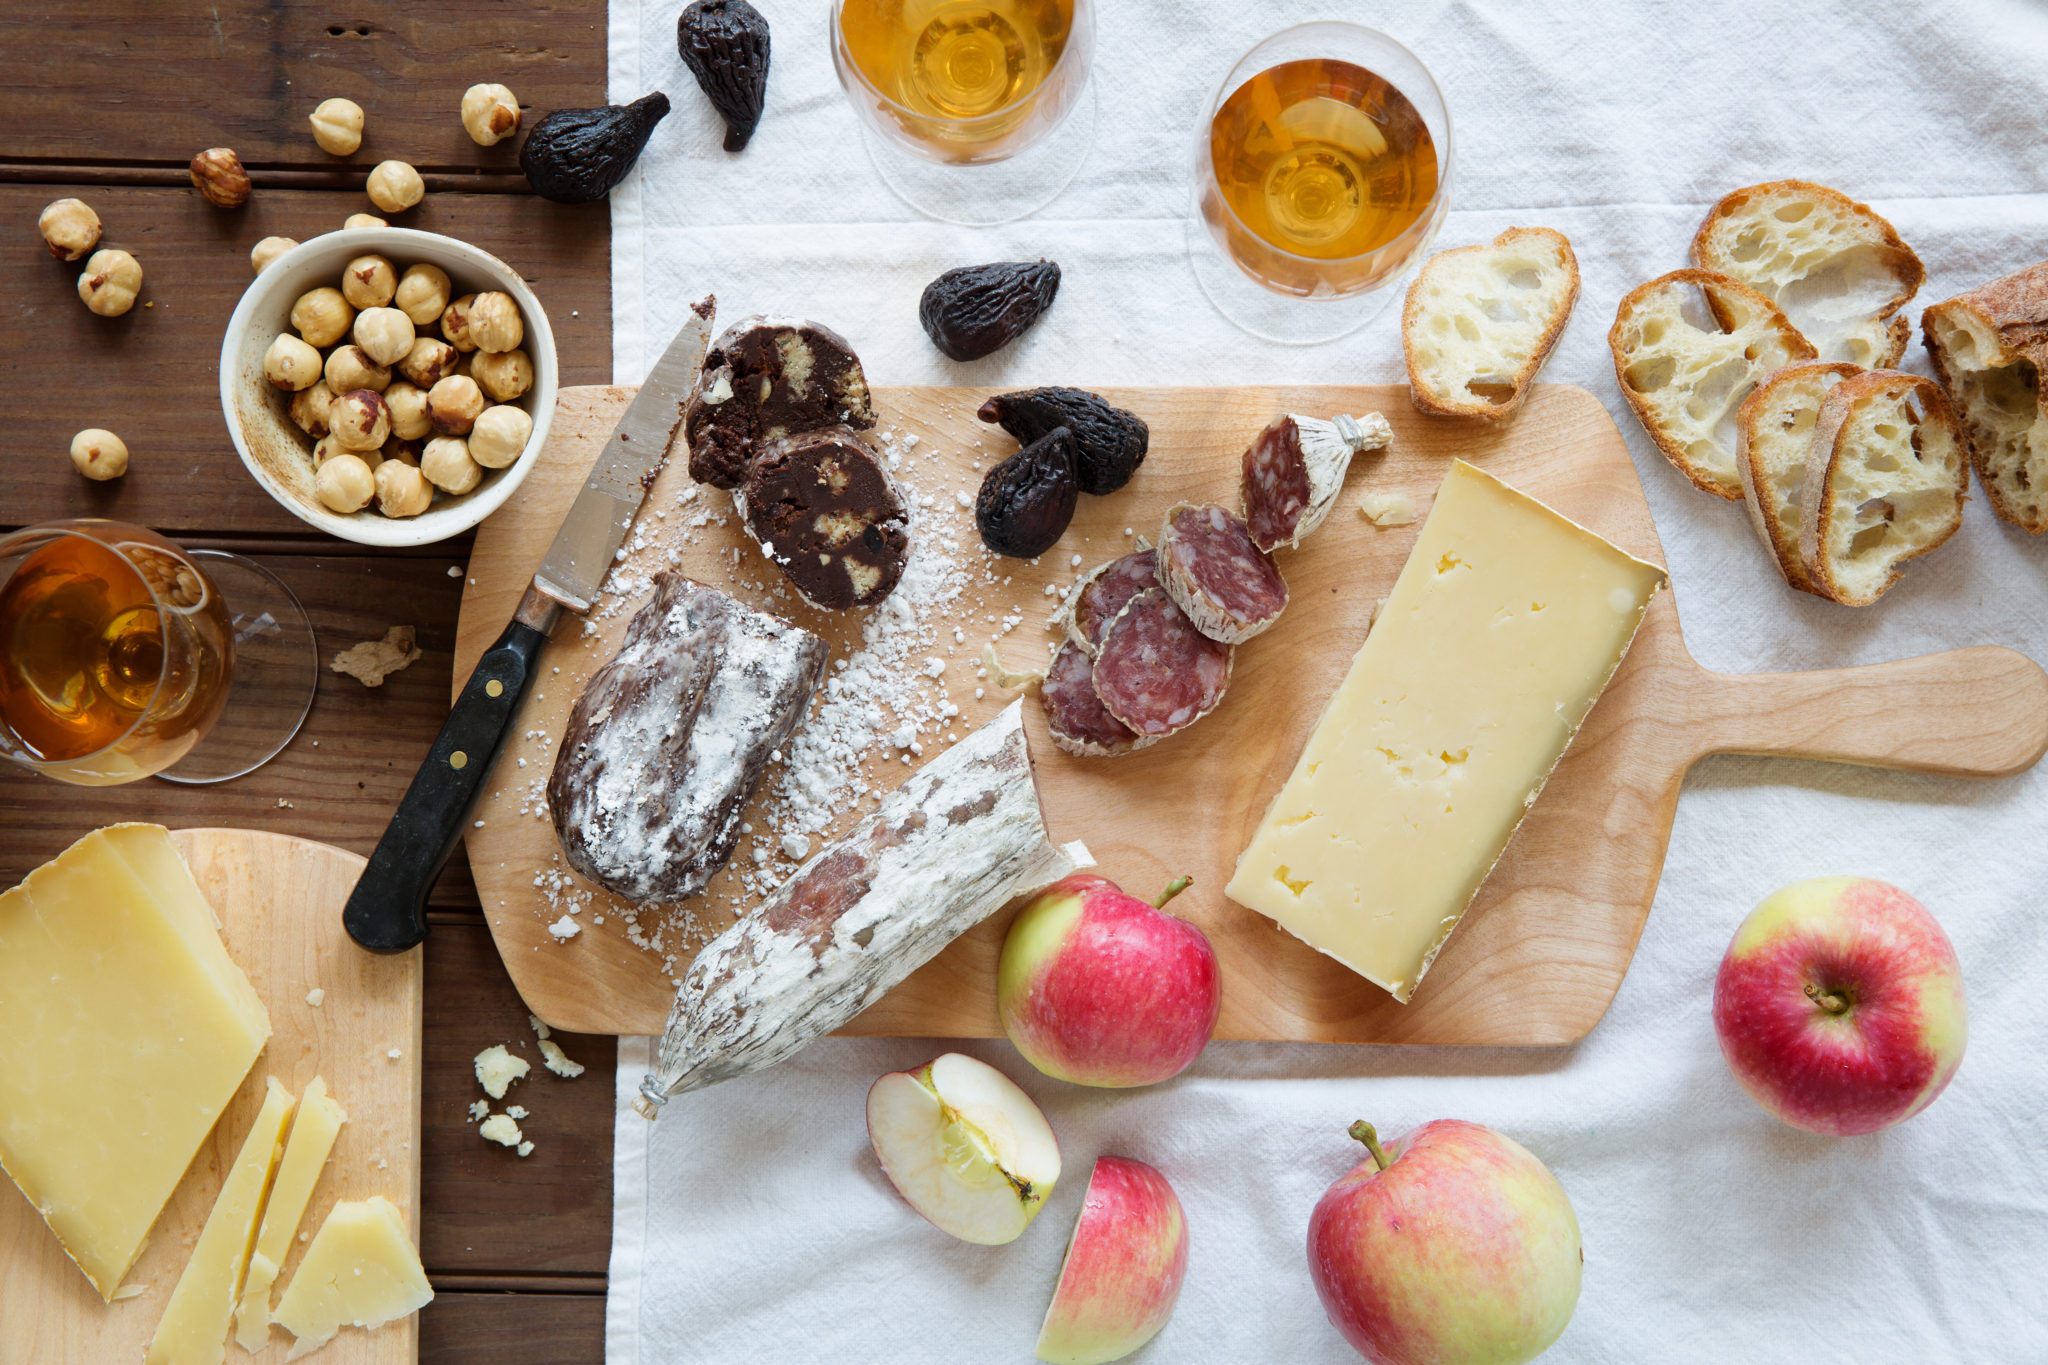 cheese, chocolate charcuterie, and salami with nuts and french bread